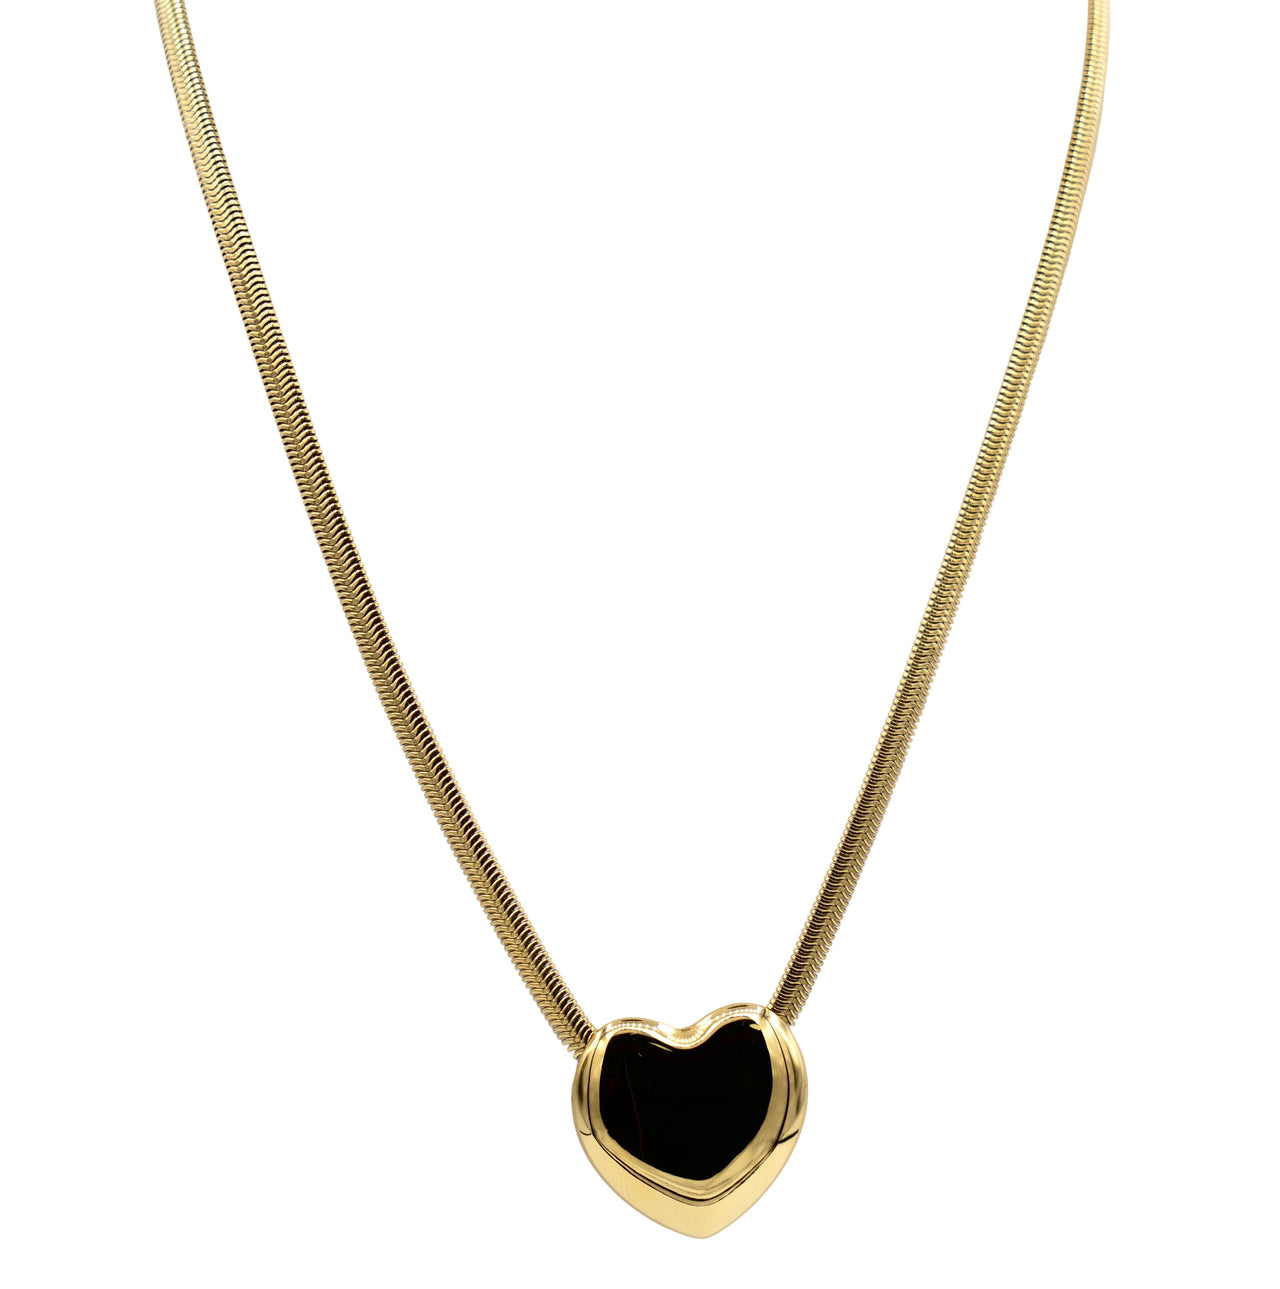 The Snake Chain with Heart Necklace